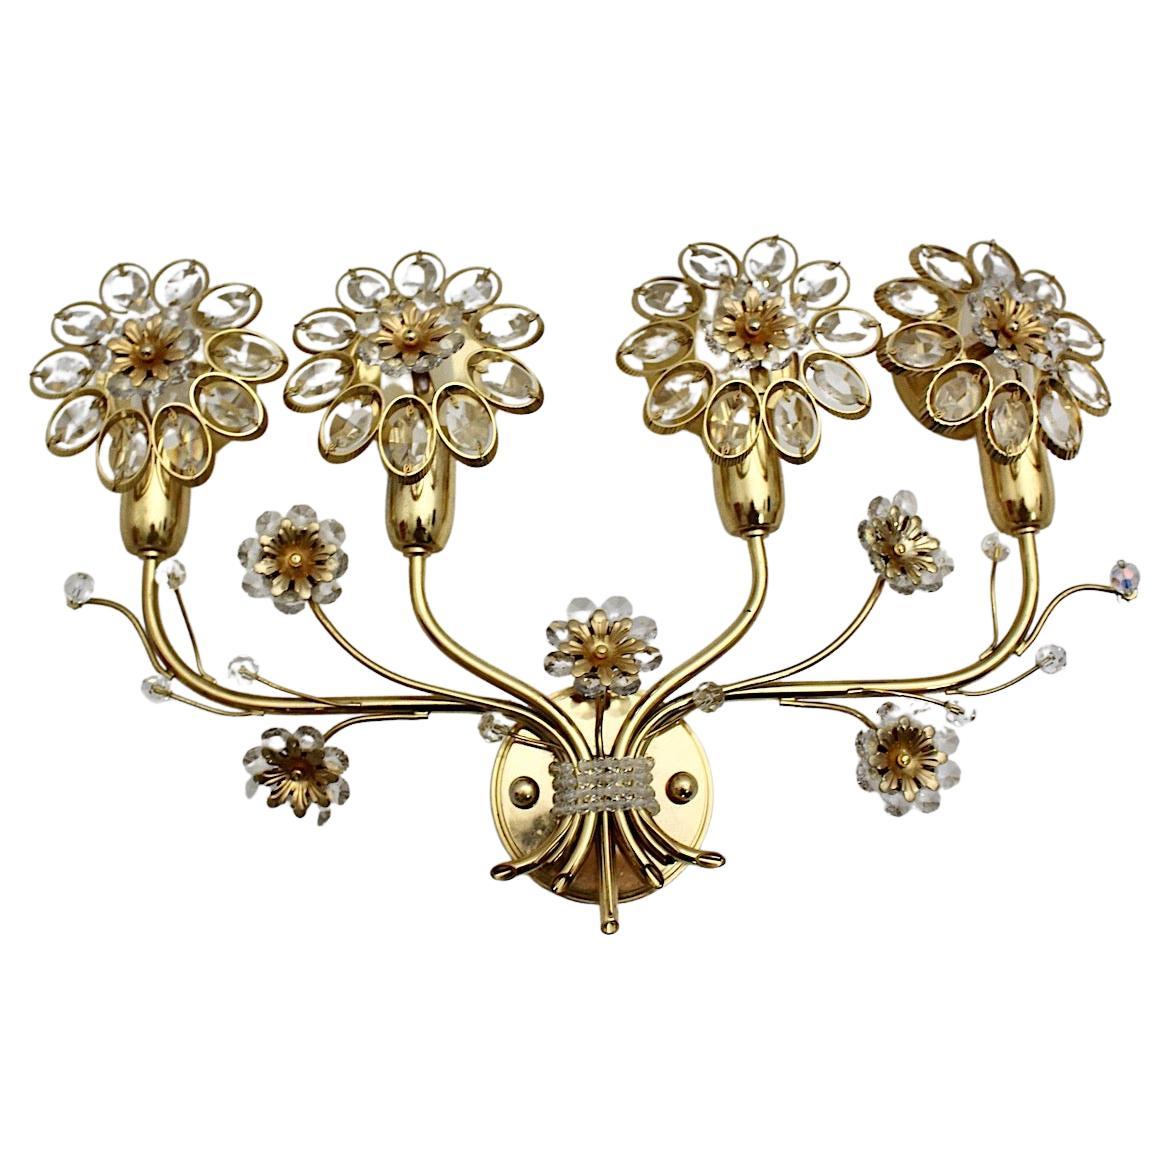 Hollywood Regency Style Vintage Naturalistic Flower Sconce Wall Light Palwa 1970